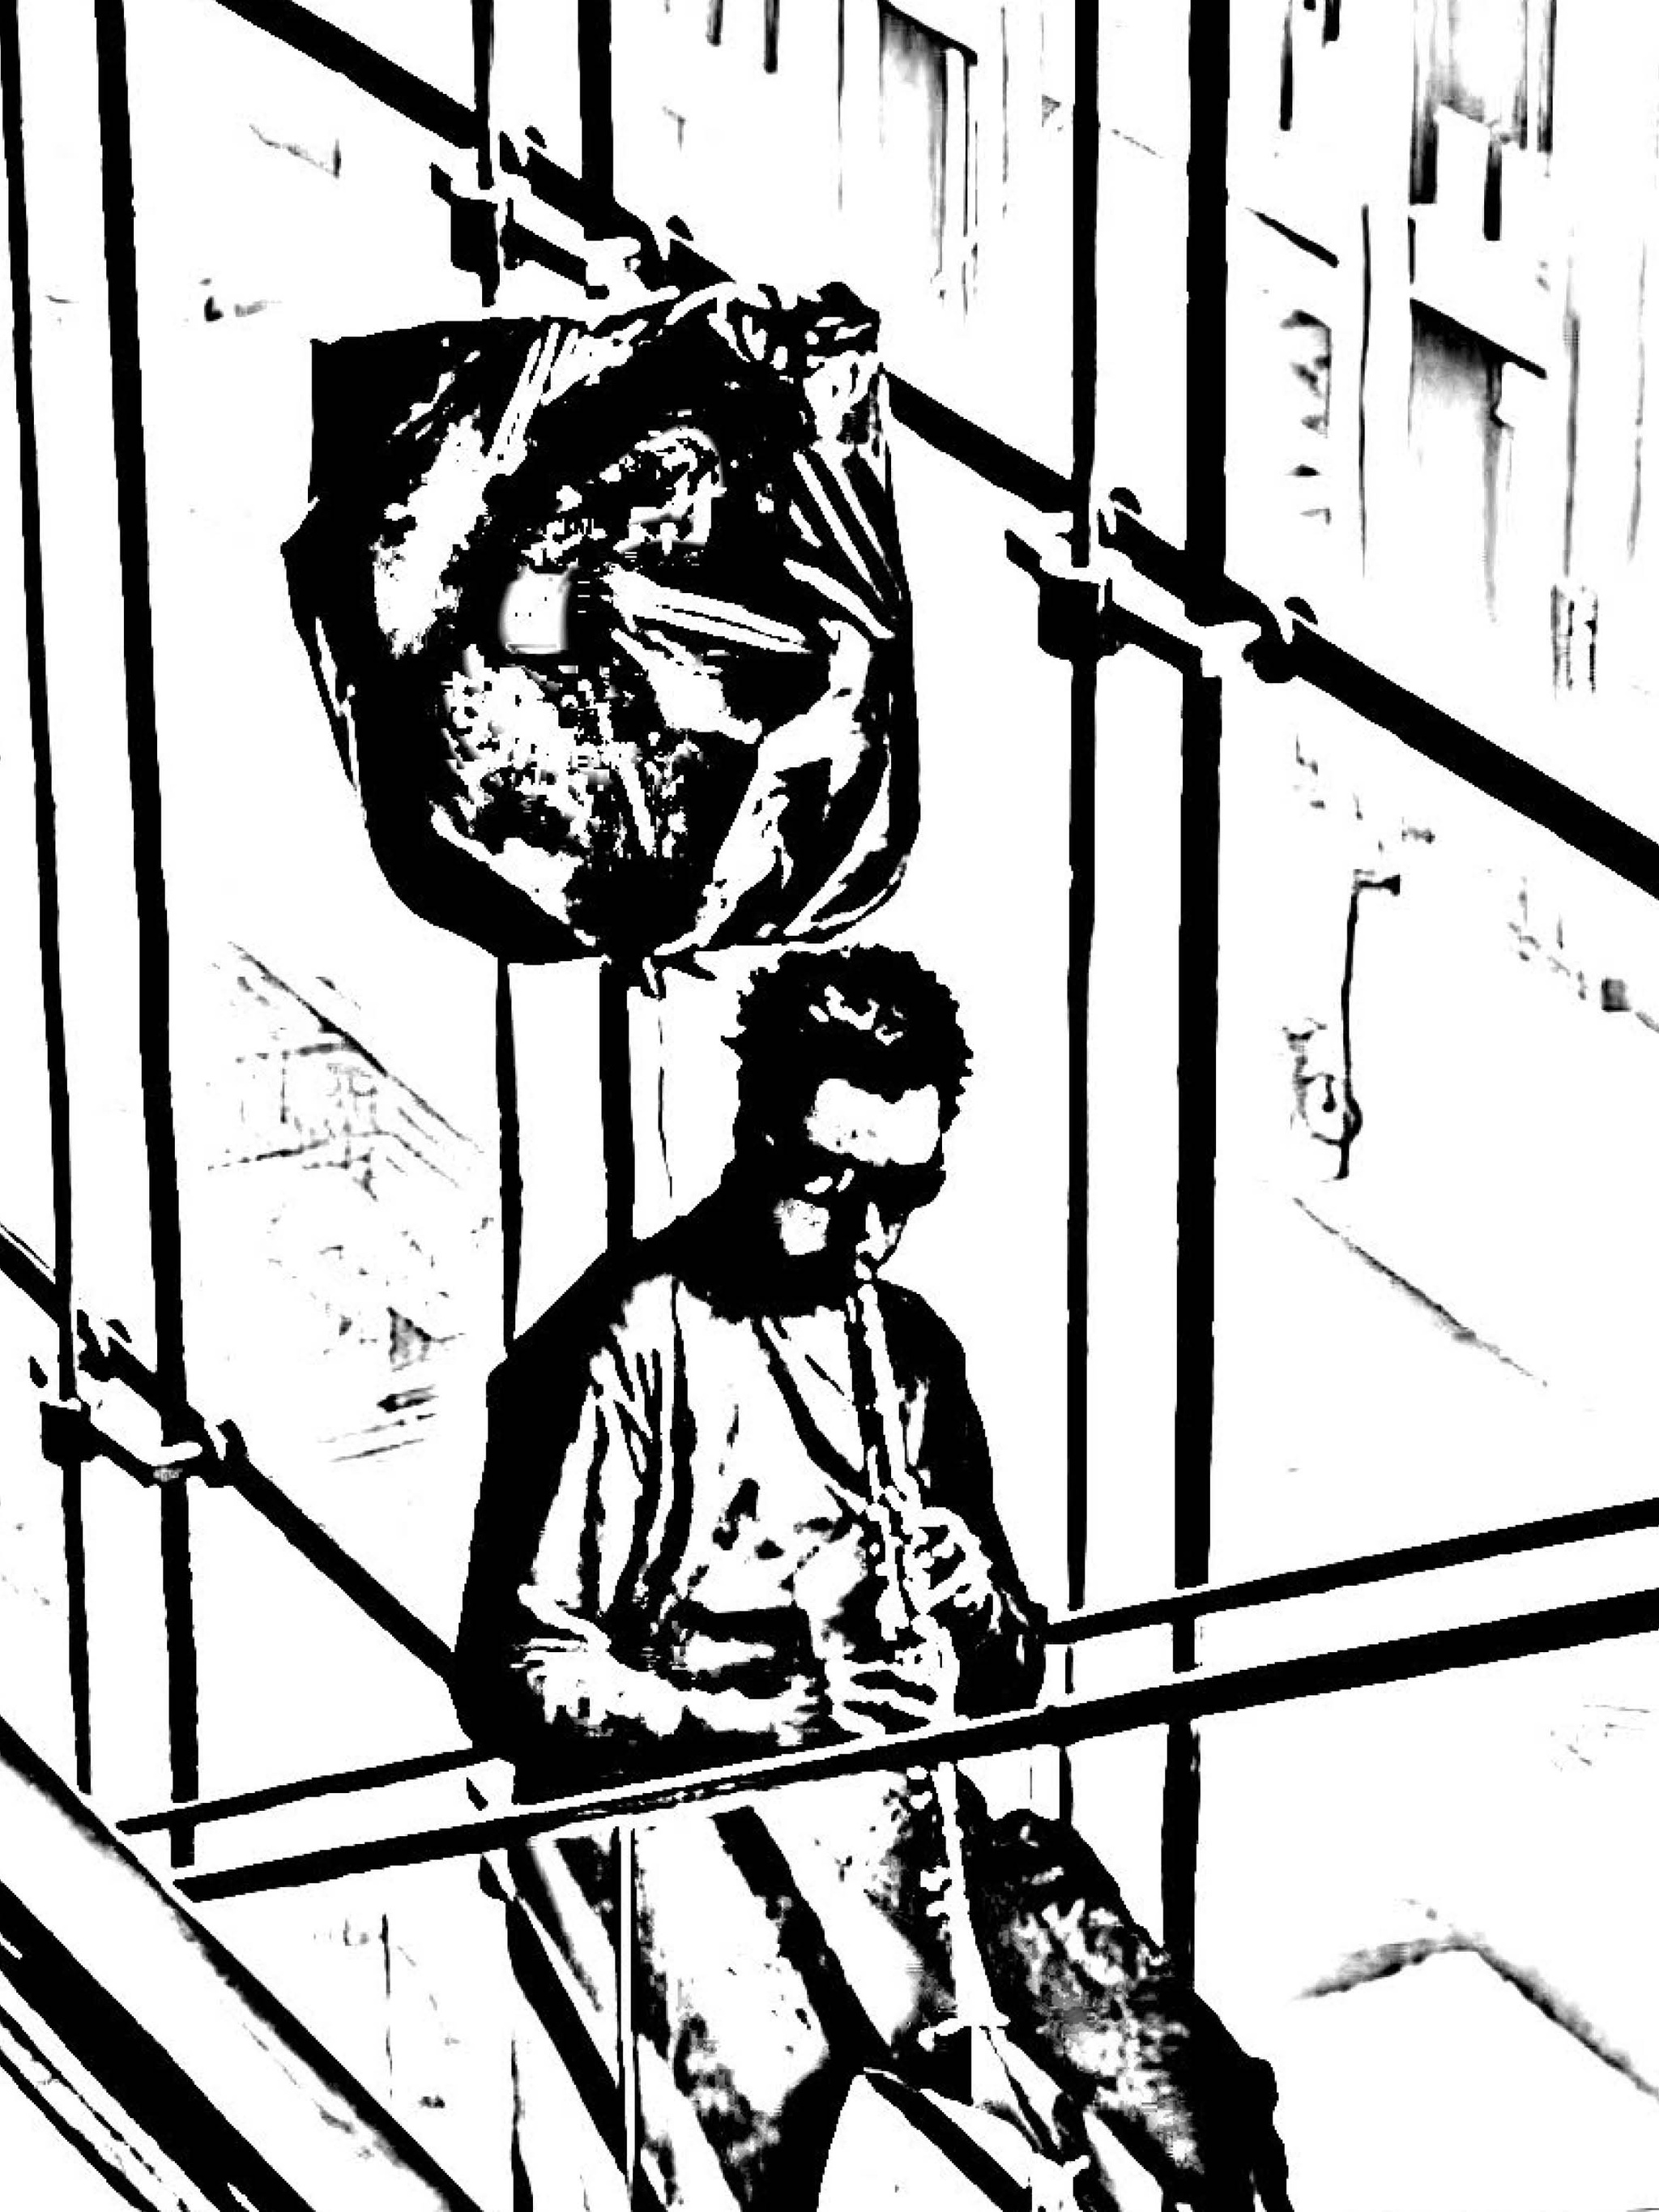 A manipulated photo digitally edited to look like a black and white line drawing. In the image, a person is seen from above riding an escalator playing a clarinet.